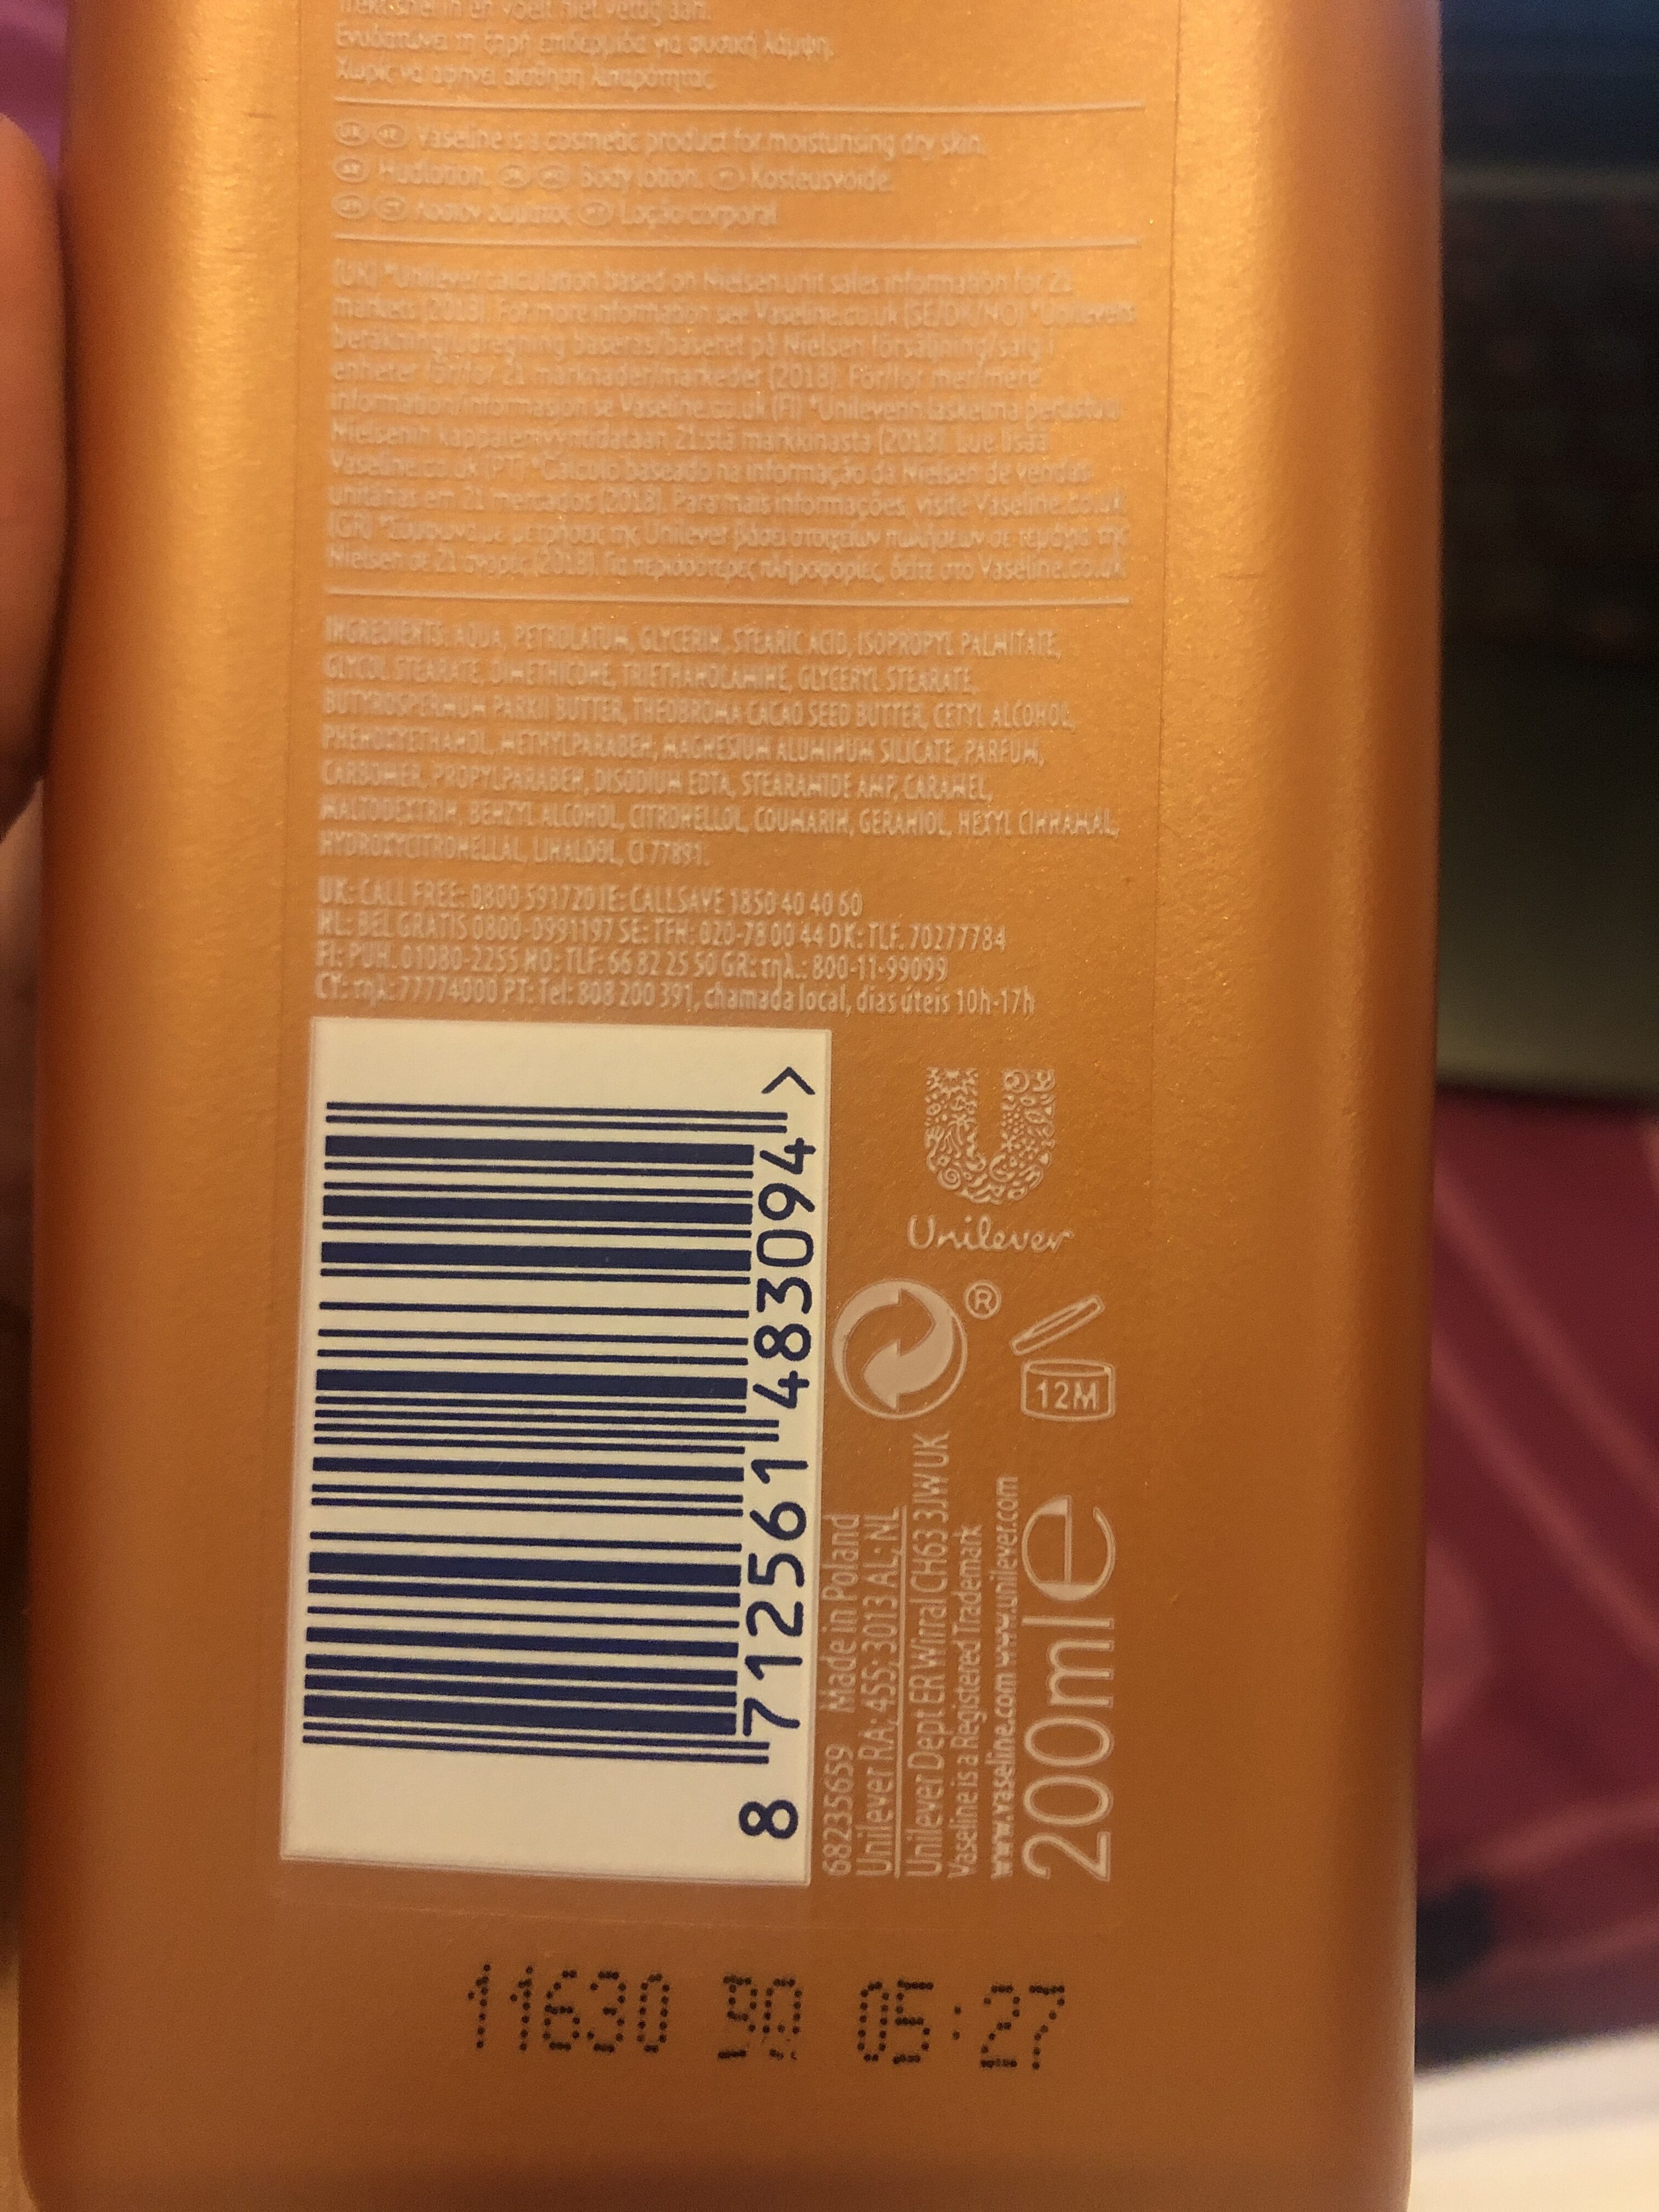 Vaseline - Recycling instructions and/or packaging information